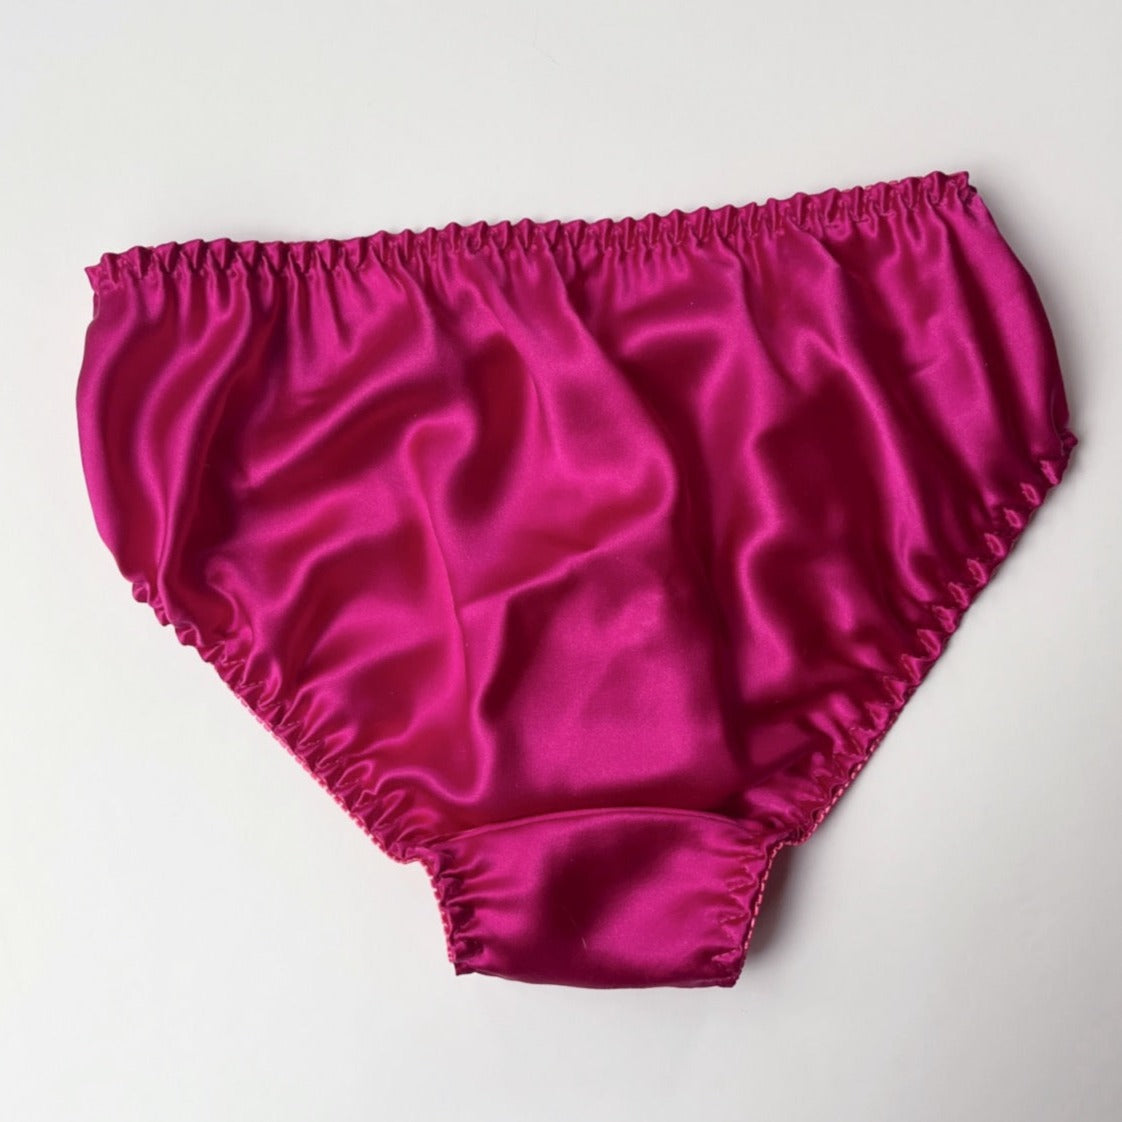 bright pink pure silk underwear for women, silk panties, made in Canada silk lingerie and apparel